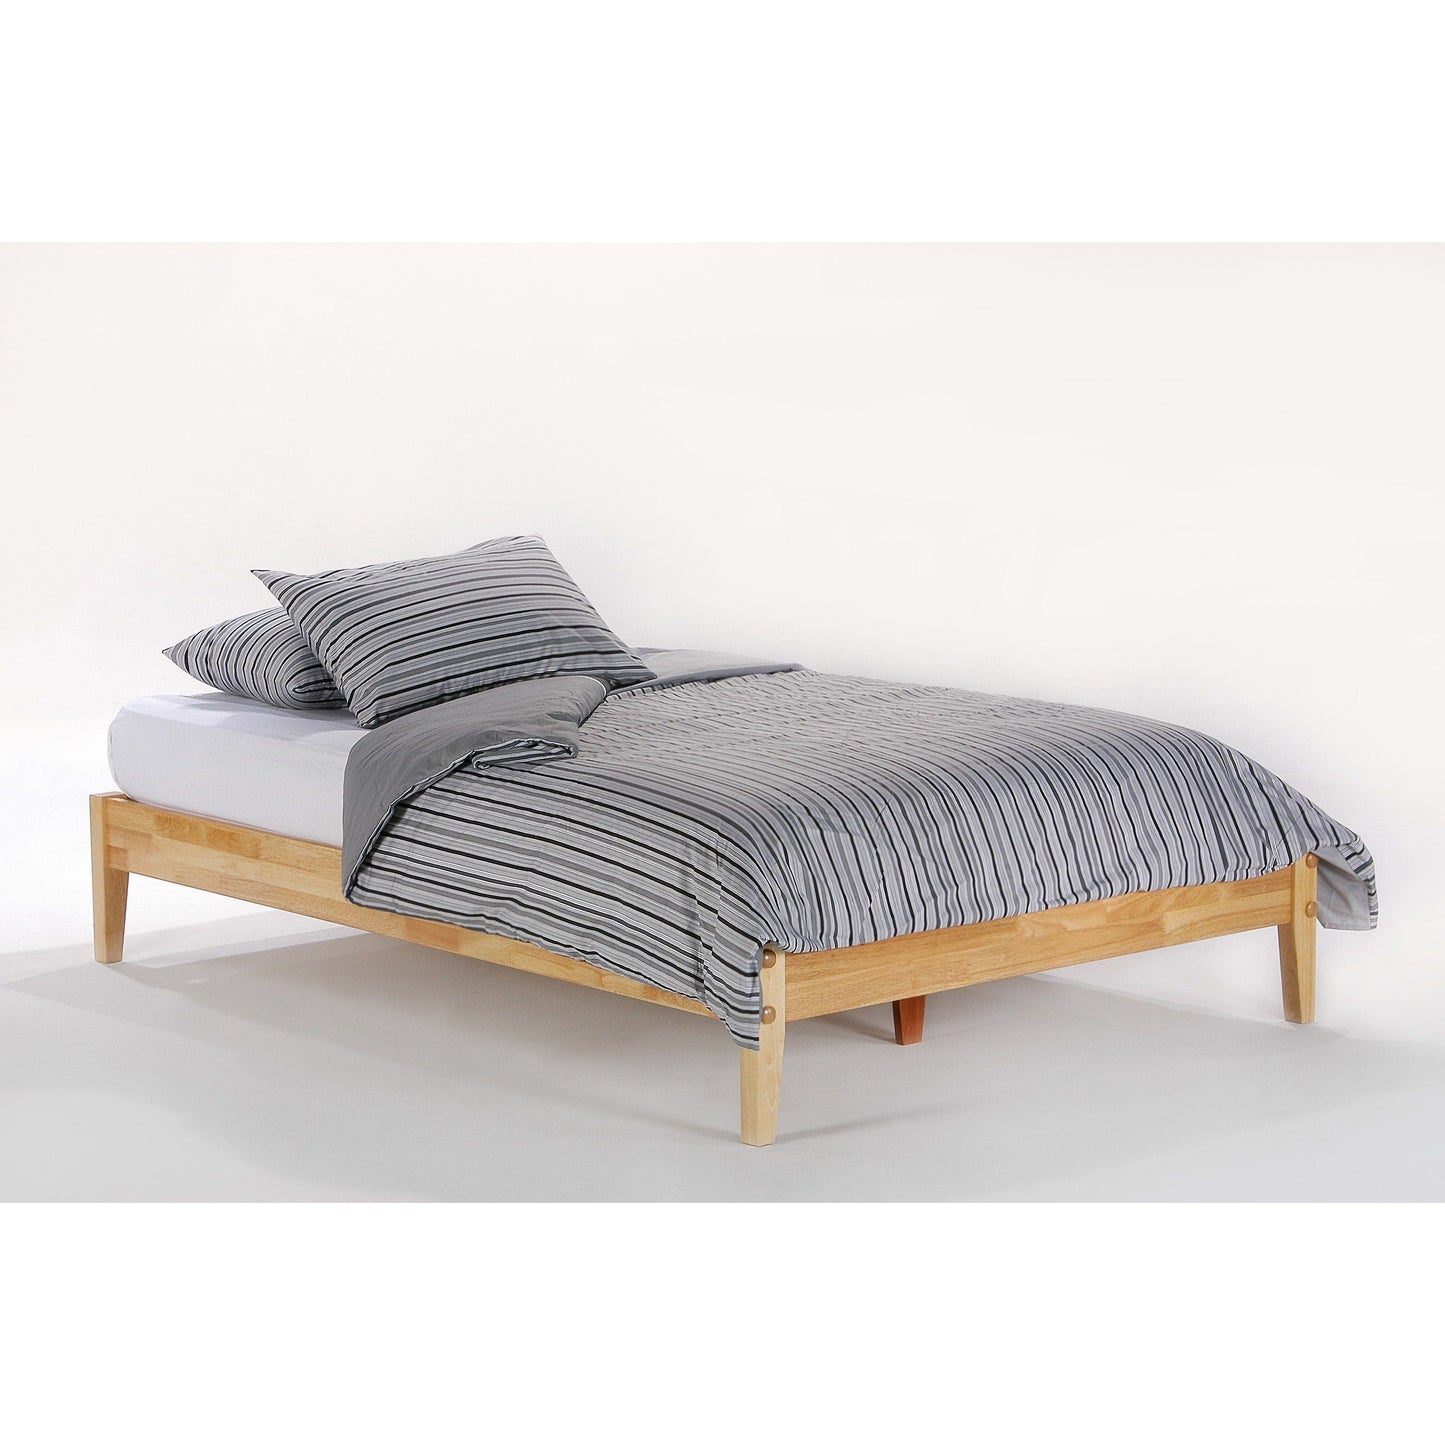 Night And Day Basic California King Platform Bed in cherry finish (P Series) BAS-CKG-COM-P-CH